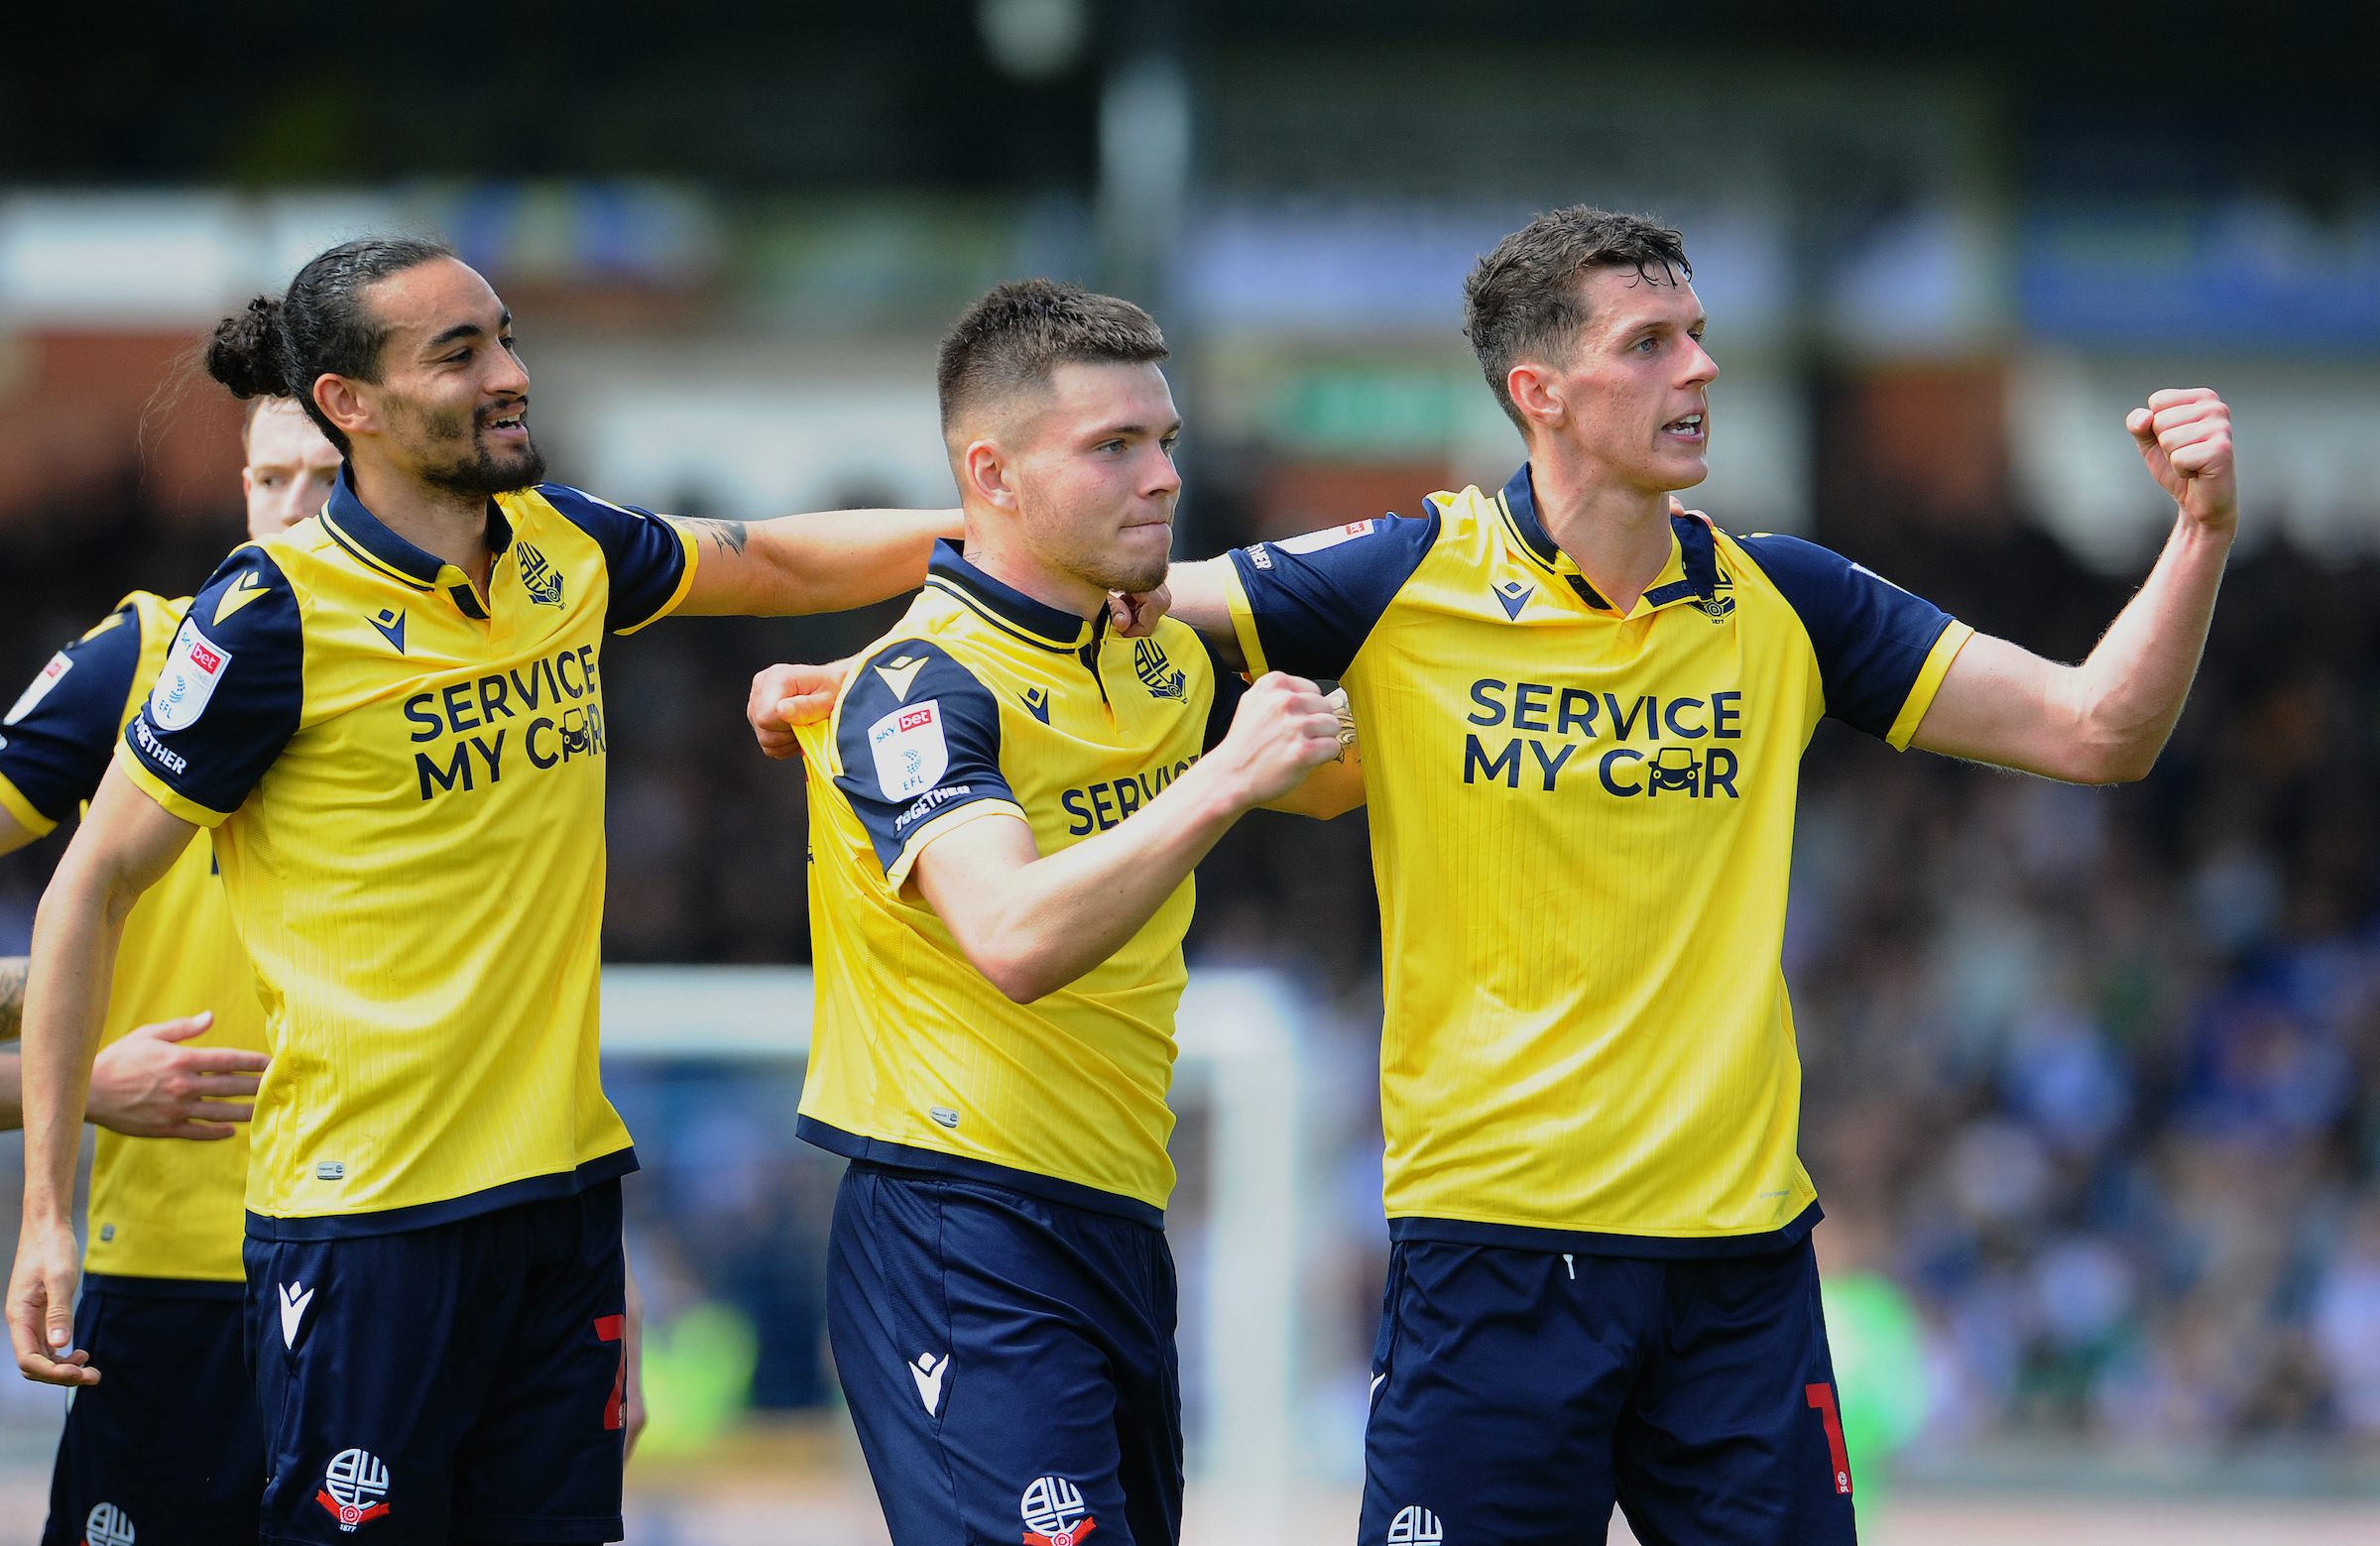 FANS’ VIEW: Bristol Rovers 2-3 Bolton Wanderers